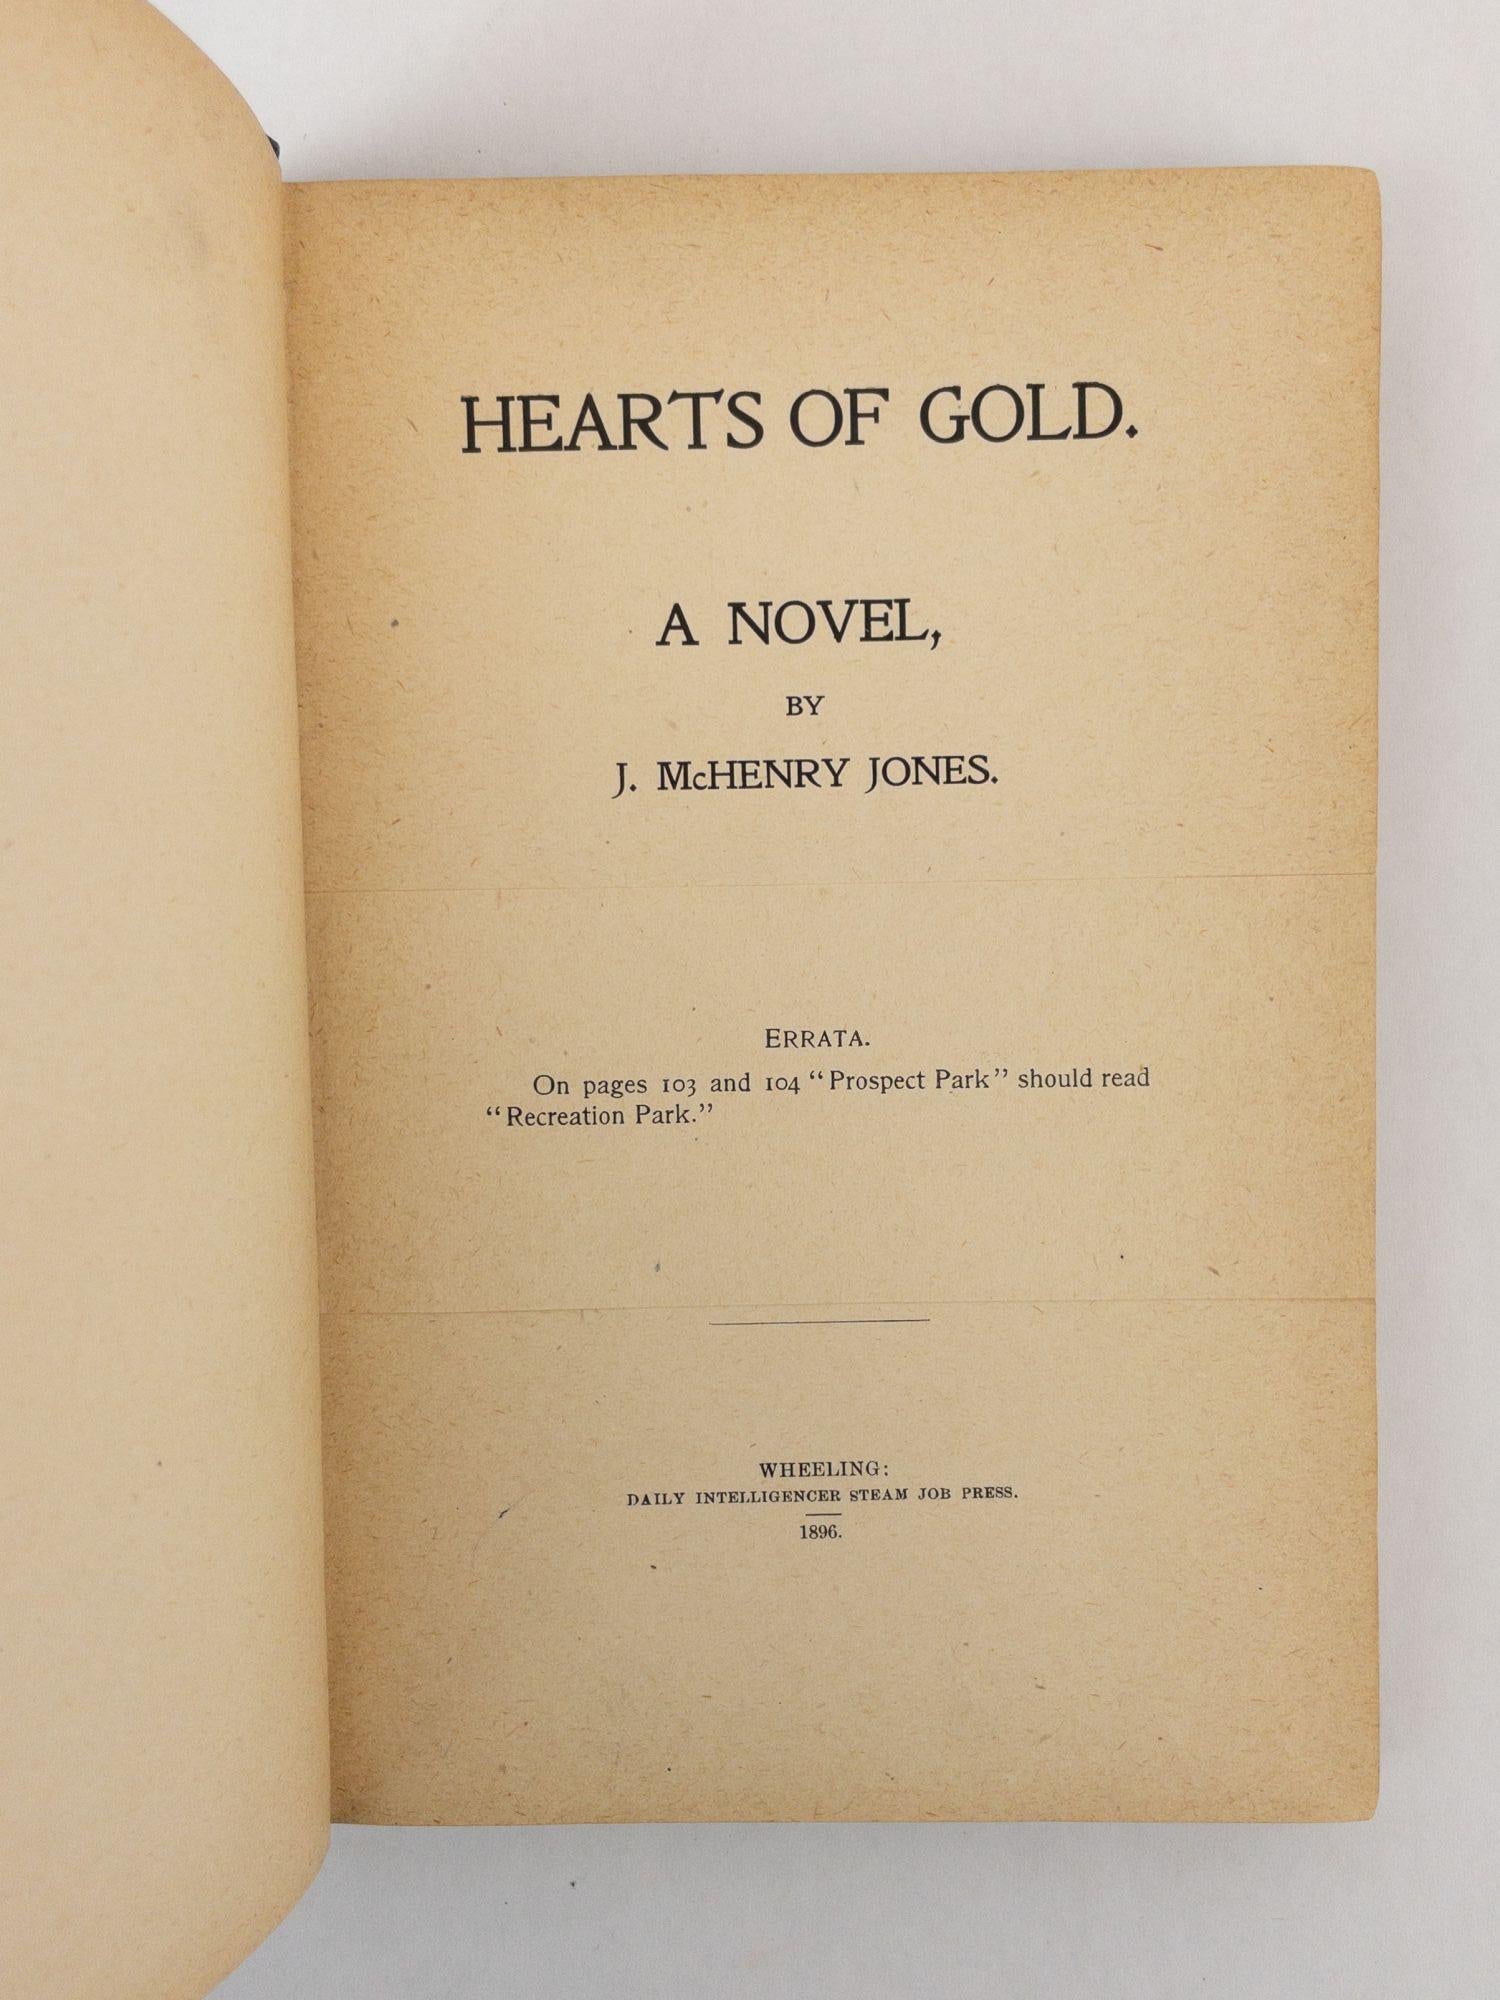 Product Image for HEARTS OF GOLD [Signed]